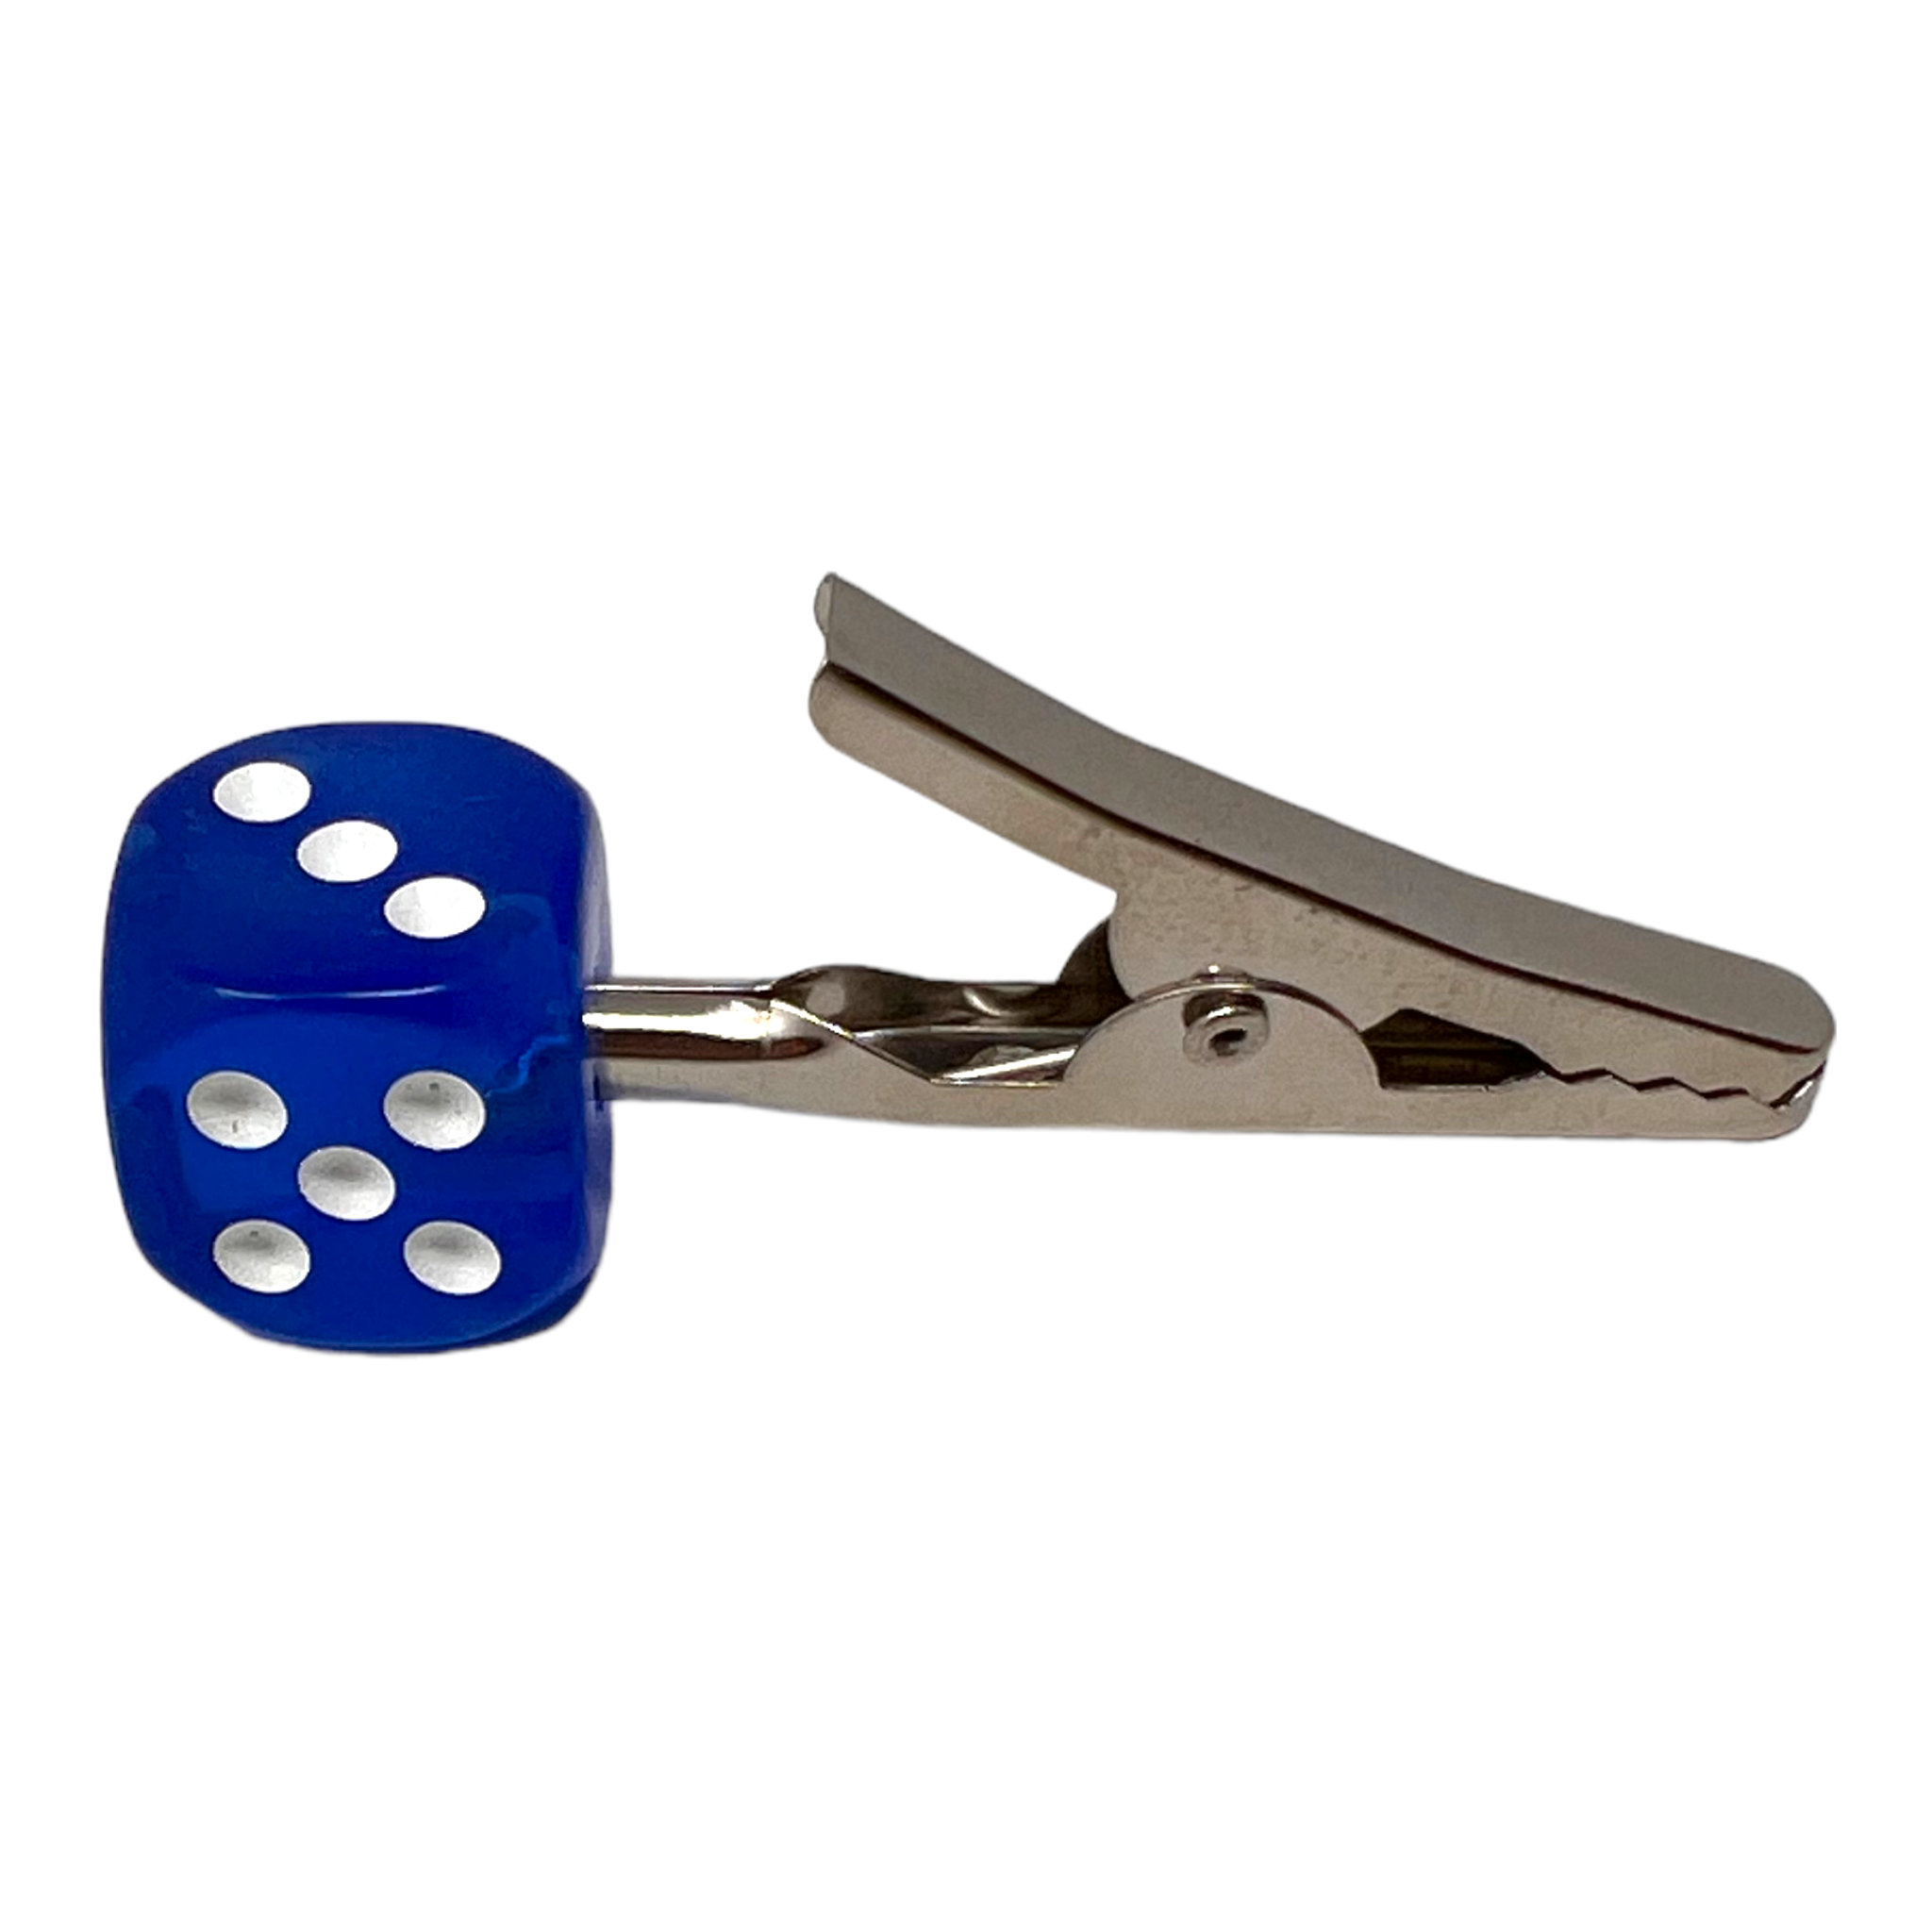 Dice Roach Clip - IAI Corporation - Wholesale Glass Pipes & Smoking  Accessories